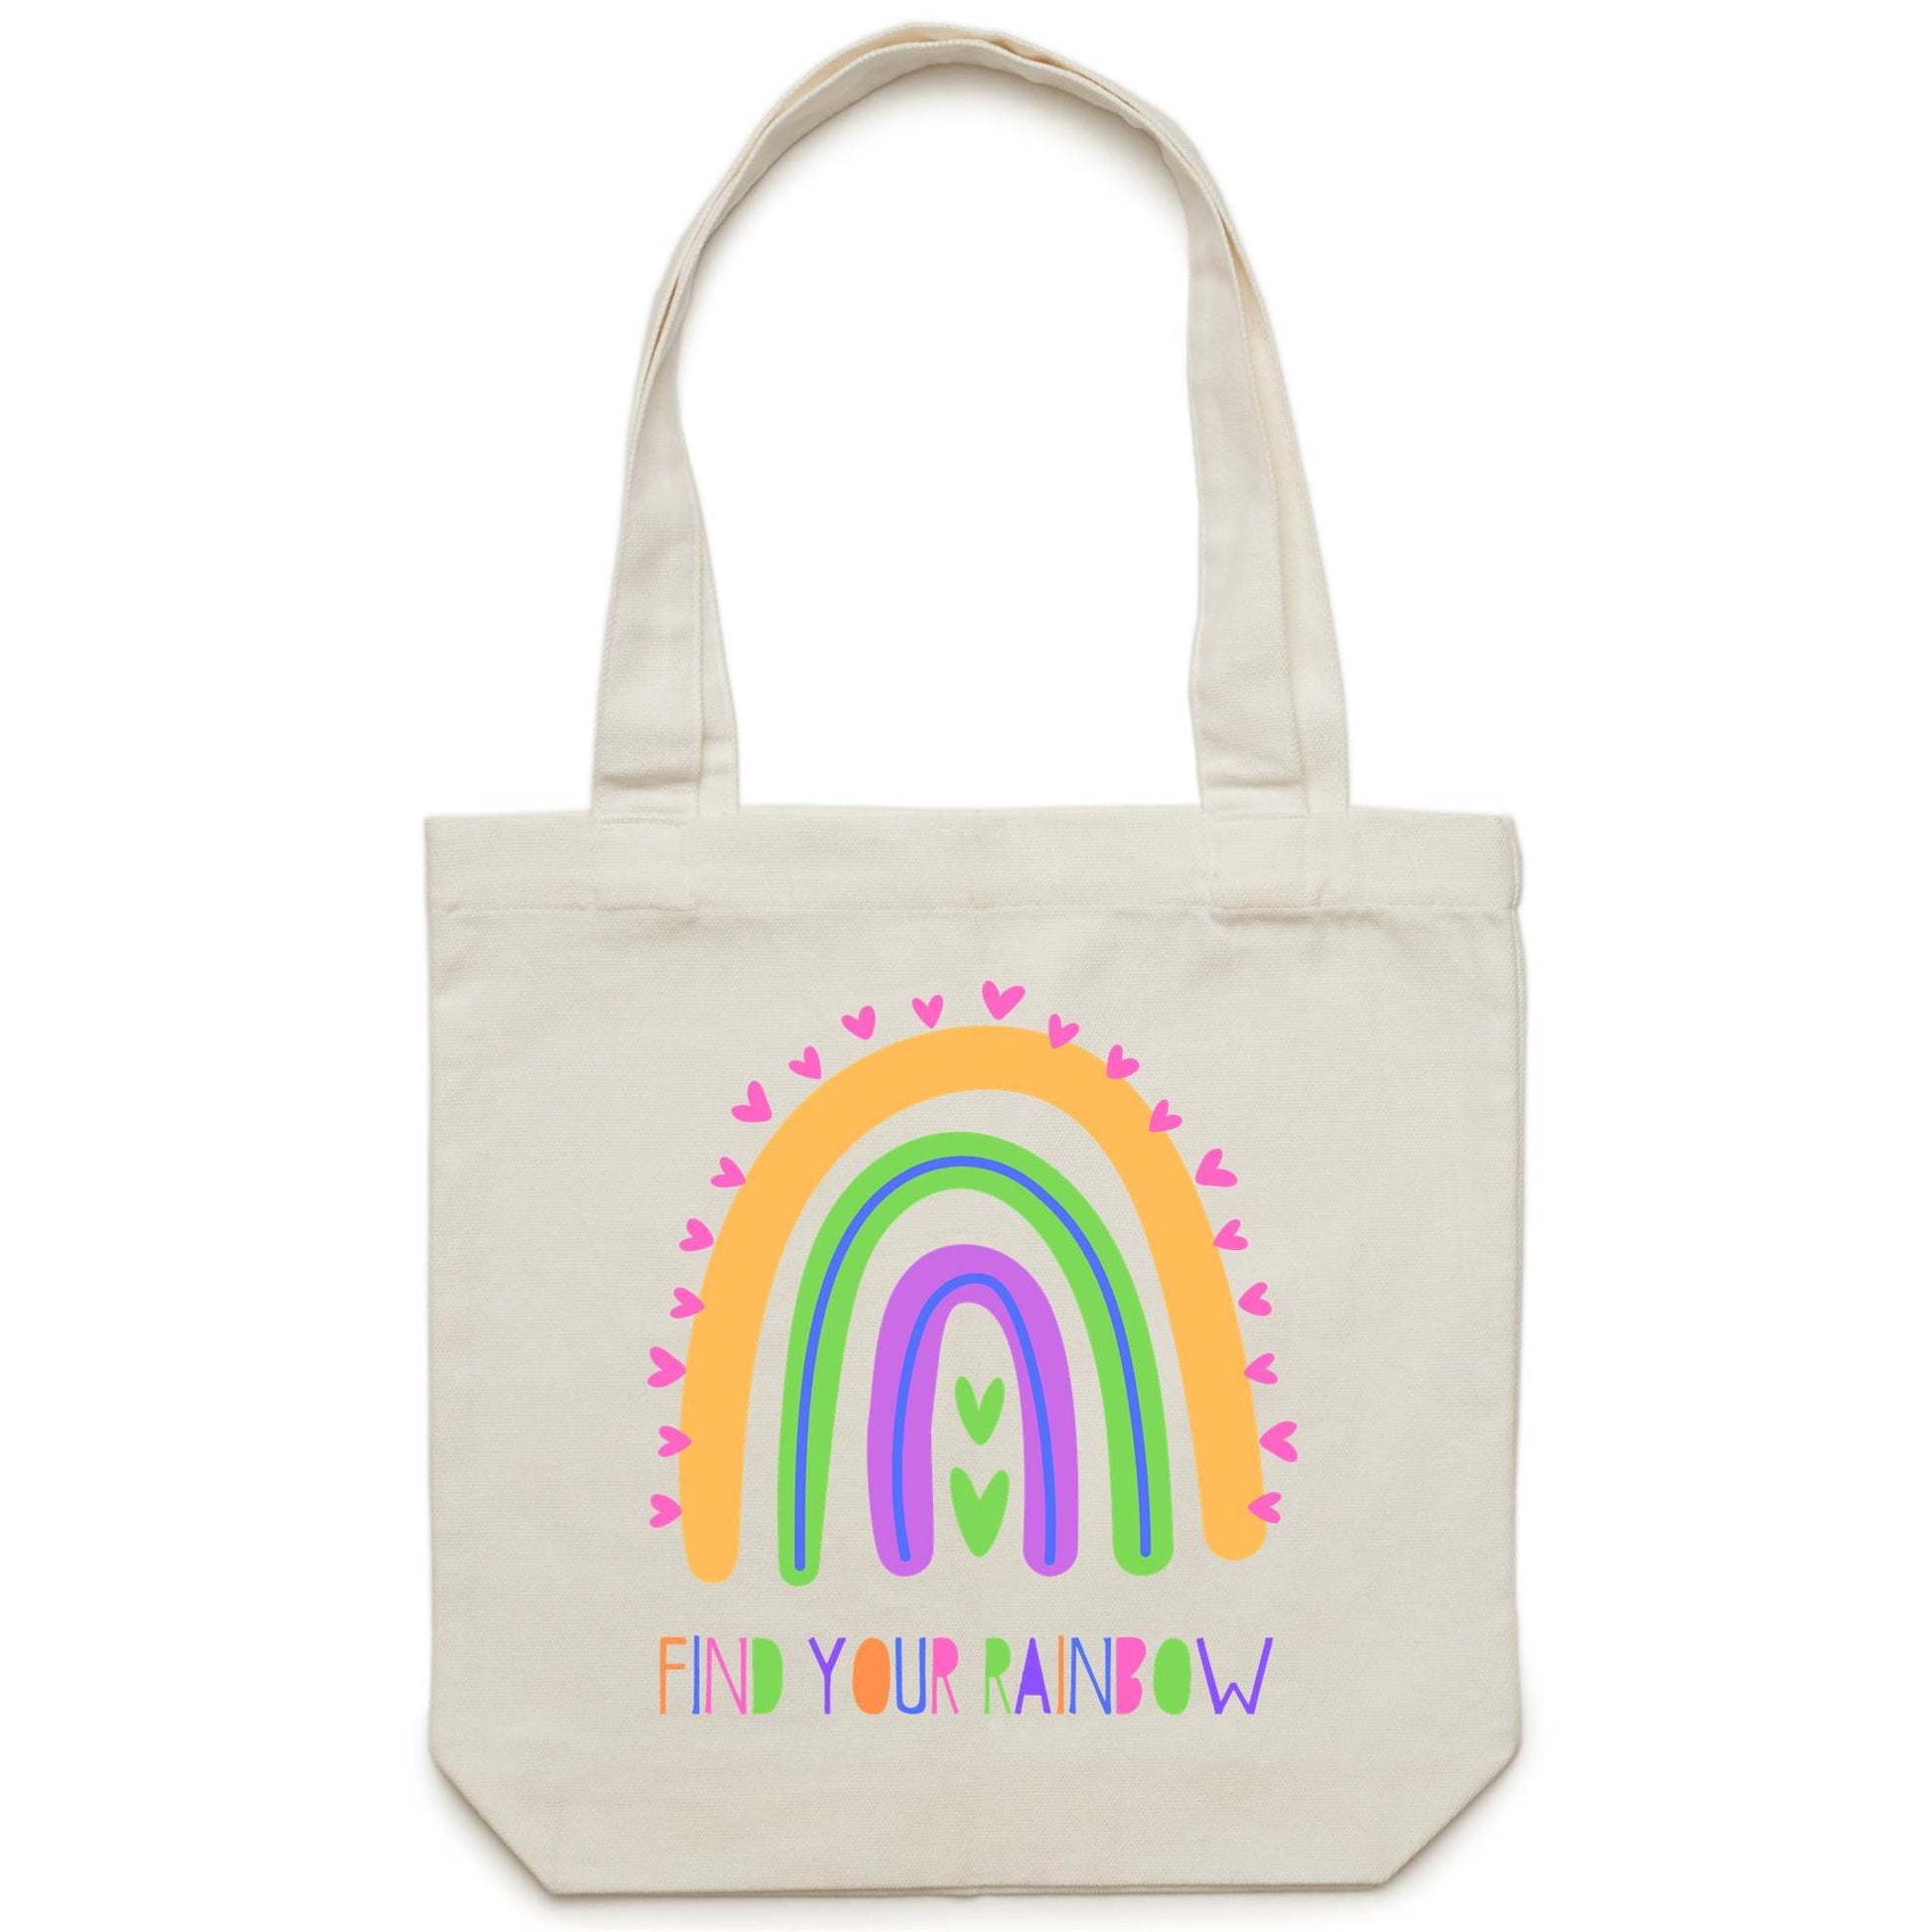 Find Your Rainbow - Canvas Tote Bag Cream One-Size Tote Bag